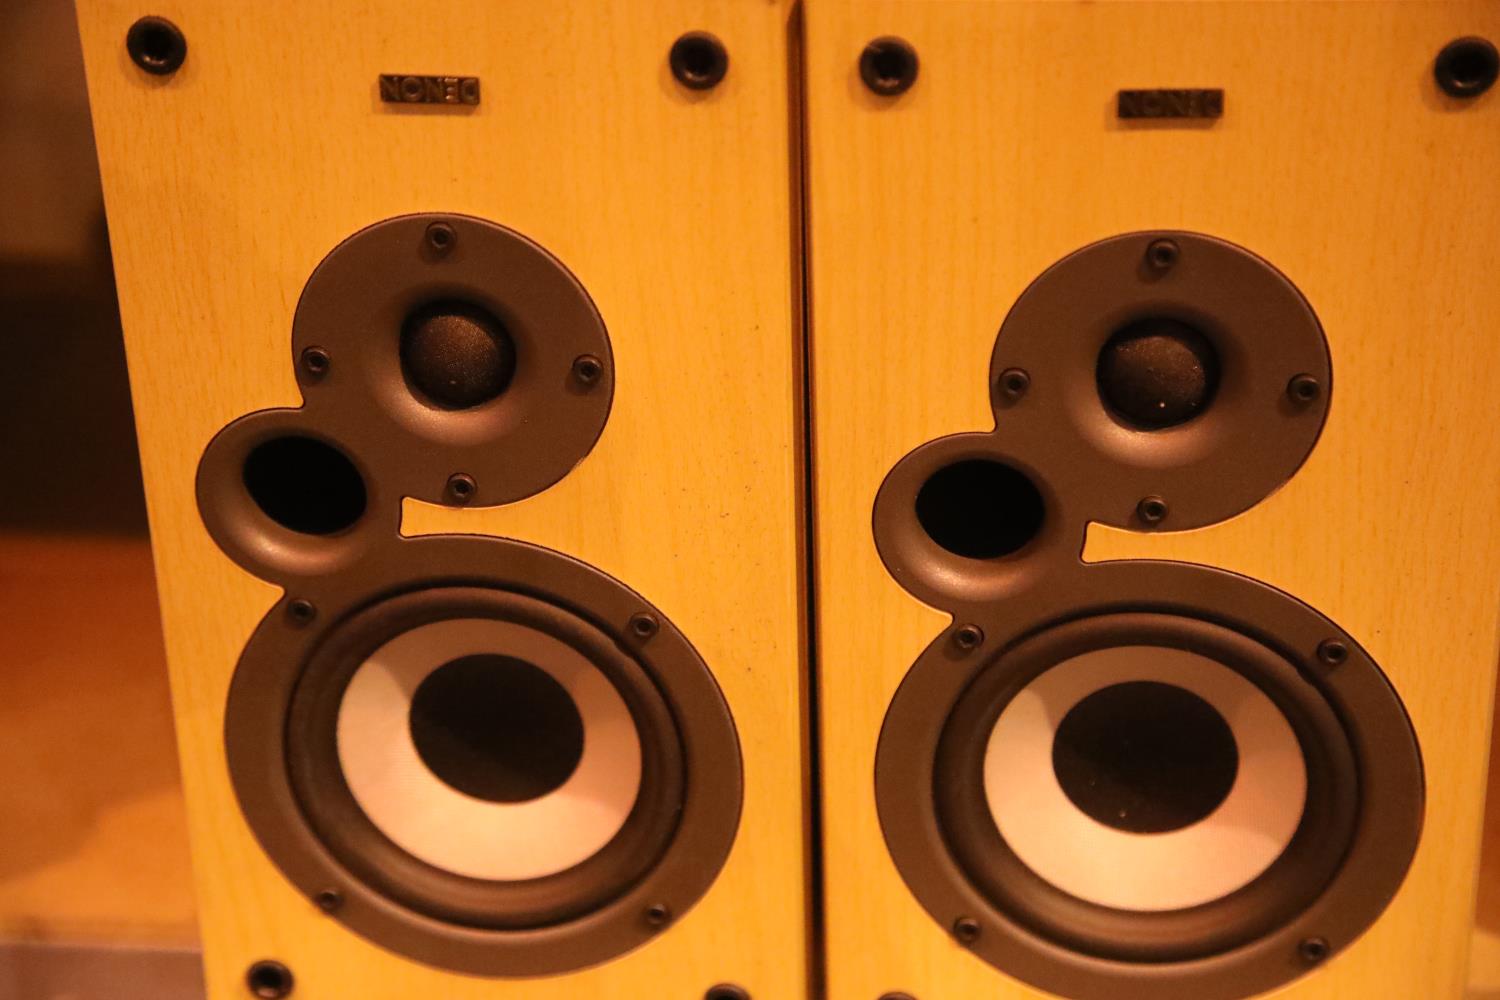 Pair of Denon SC-M10K speakers. Not available for in-house P&P